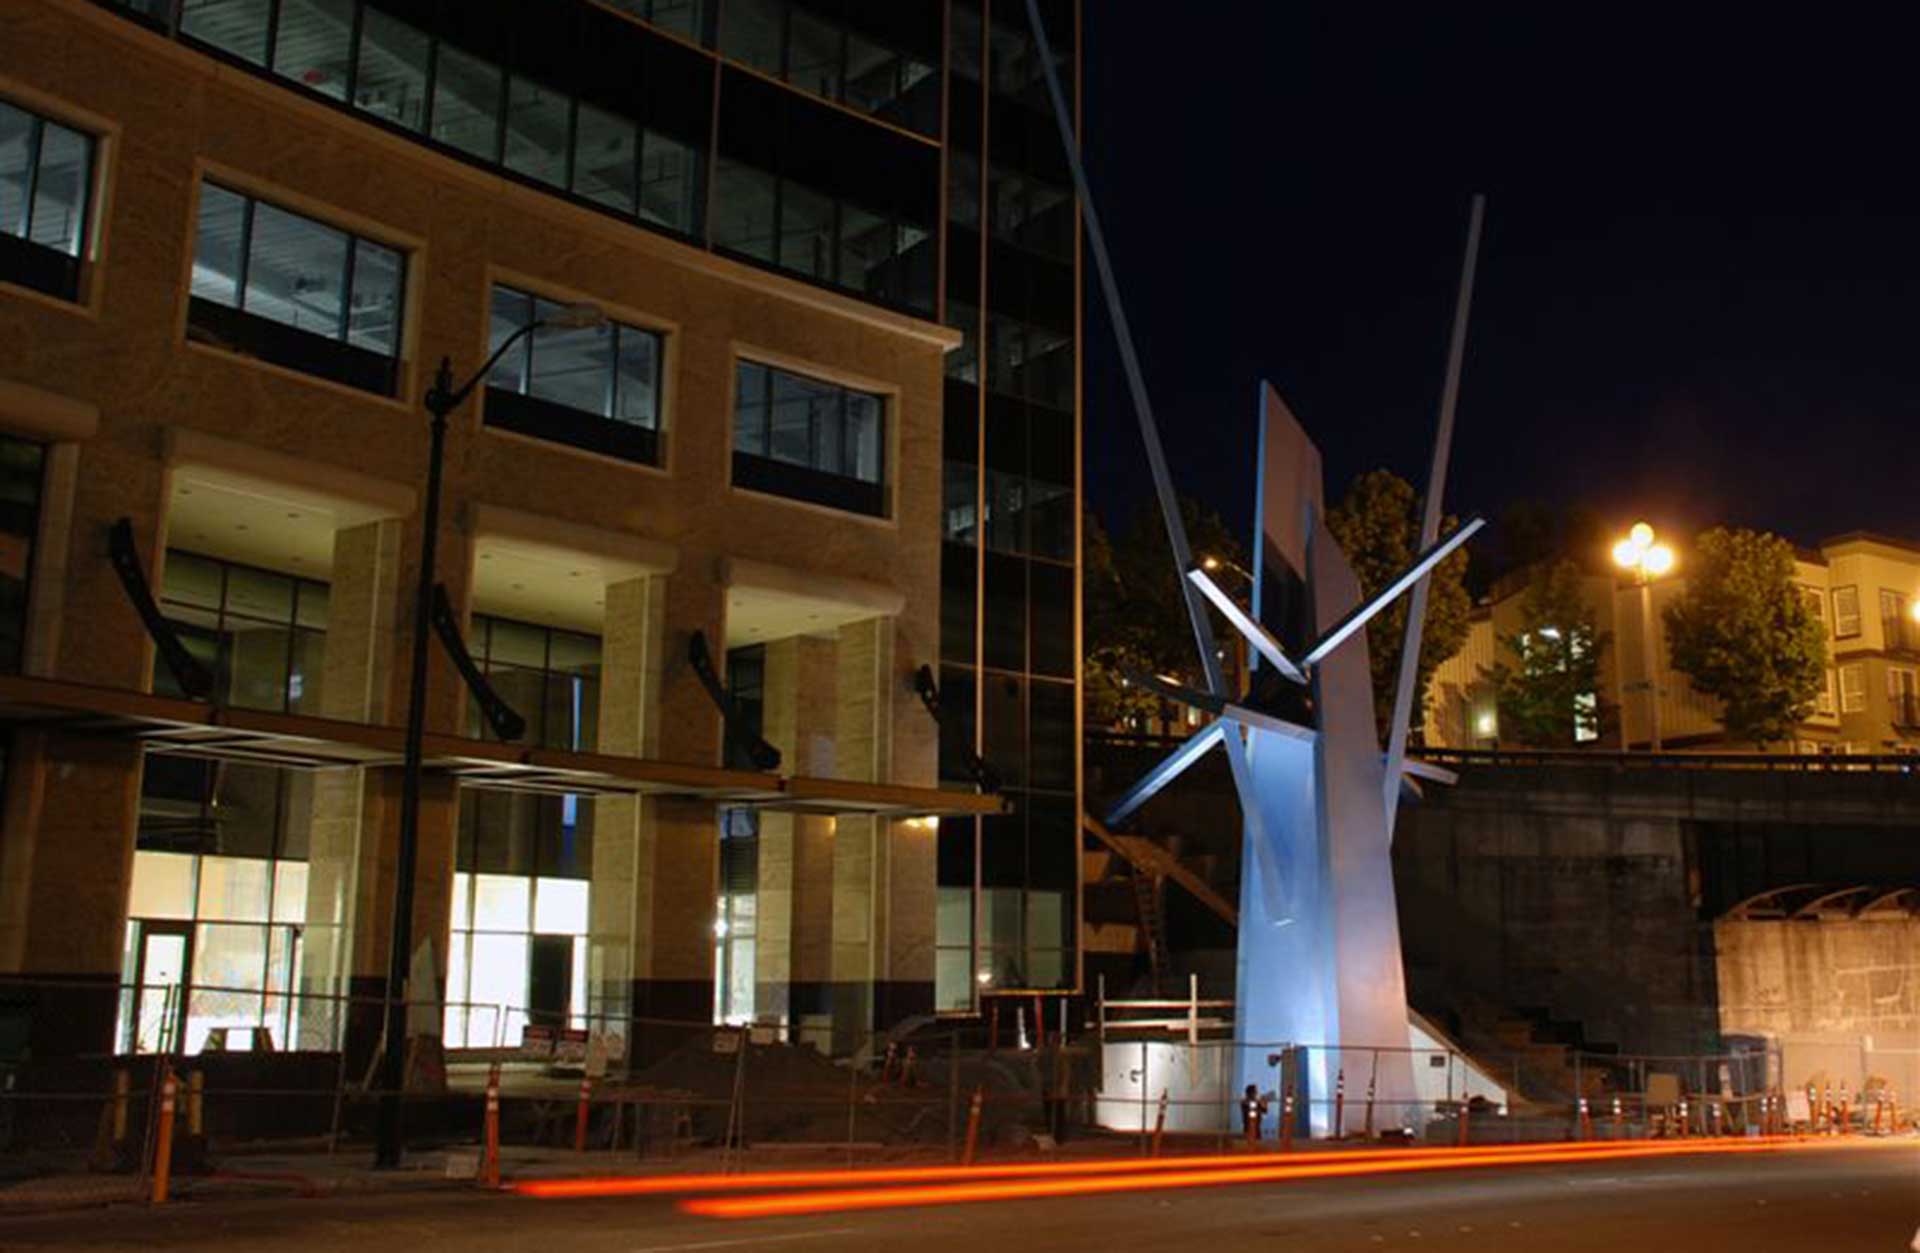 5th and Yesler exterior at night with statue